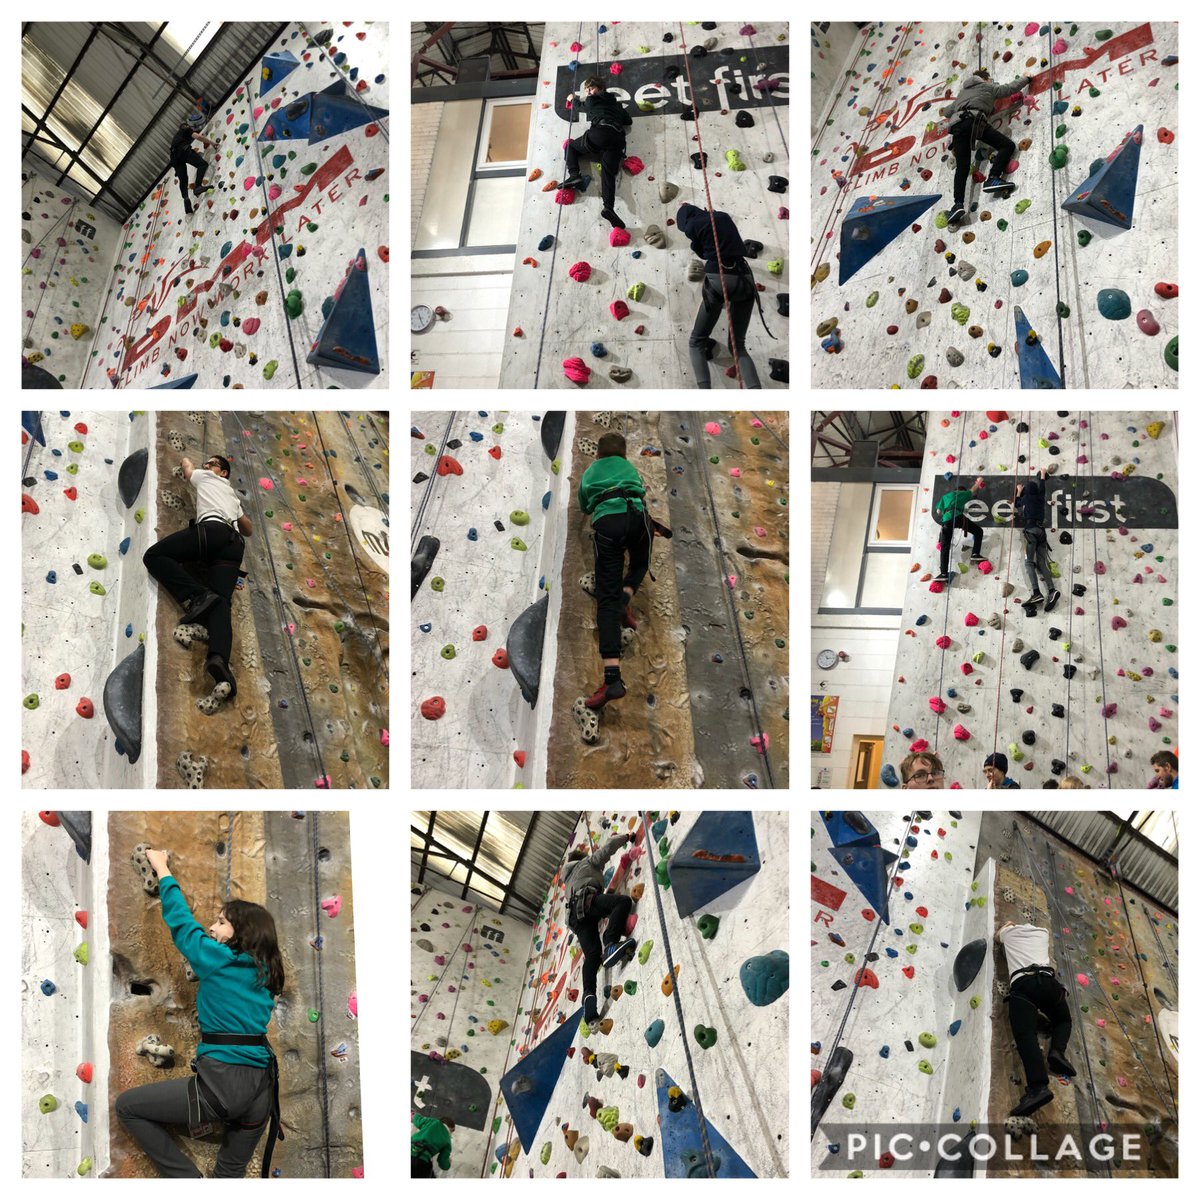 Thanks to the @FoundryClimbing for a fun filled morning, we had great fun climbing!🧗🏽‍♂️🧗🏻‍♀️